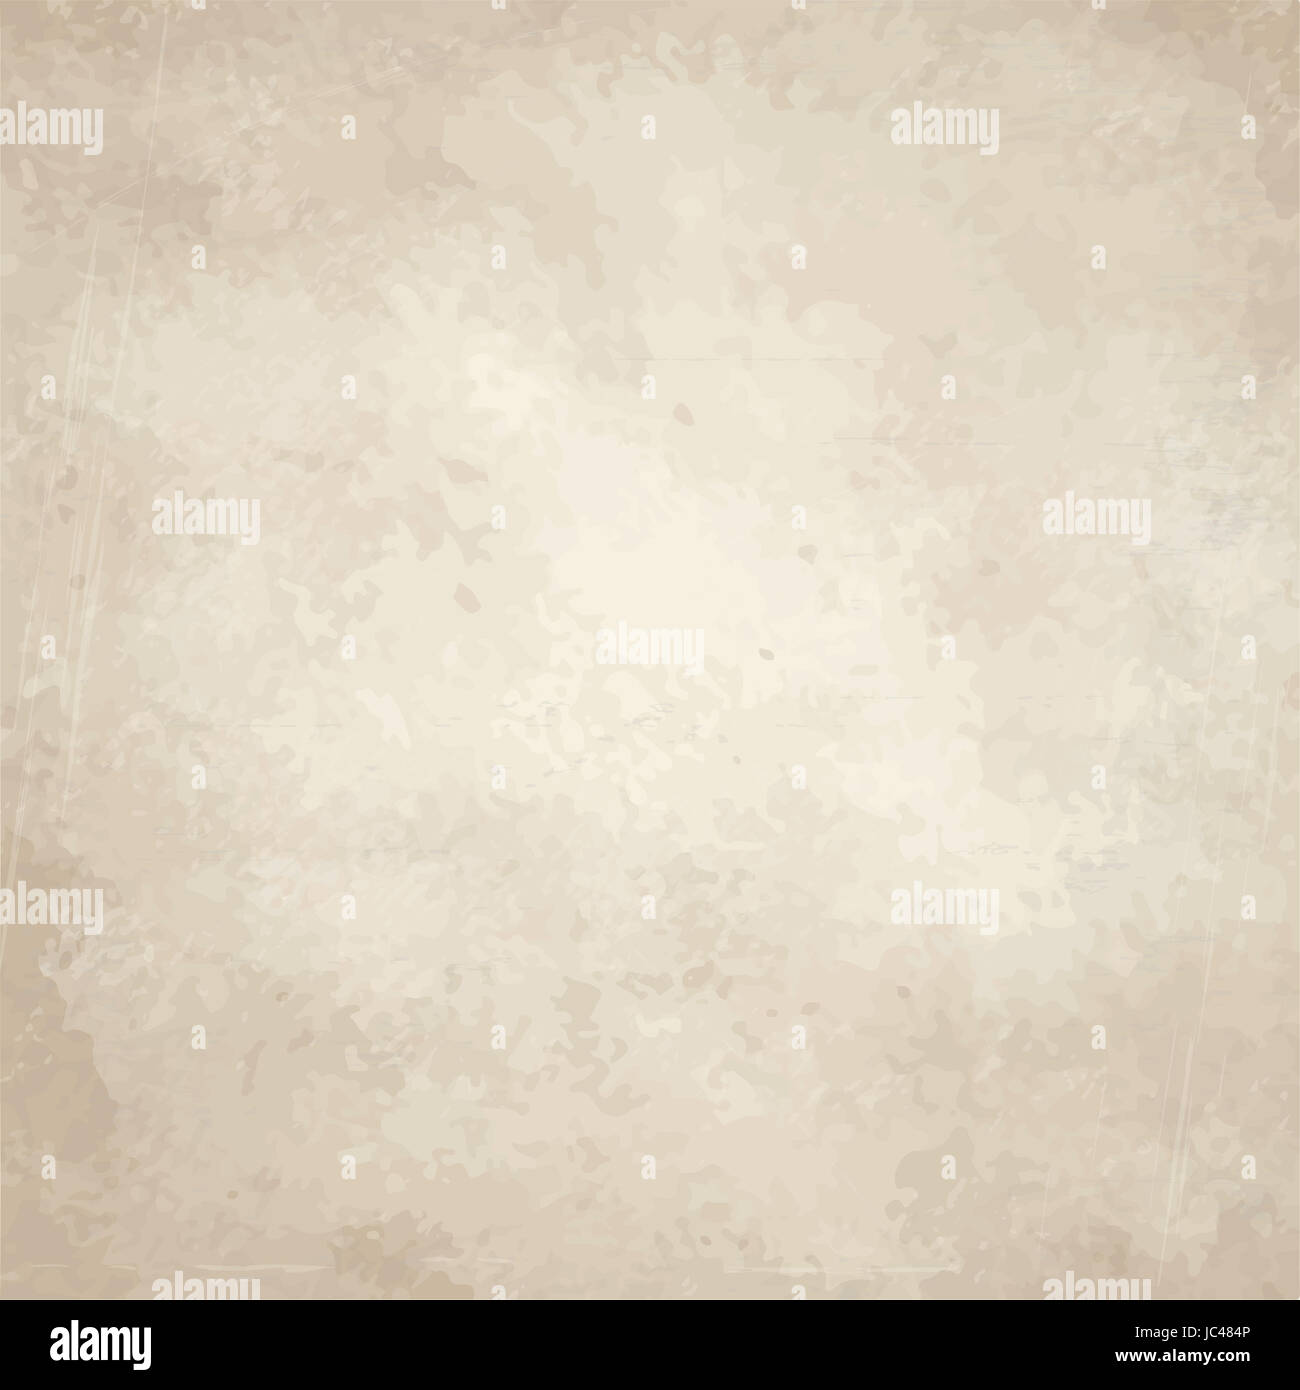 vector of old vintage yellowed paper background Stock Photo